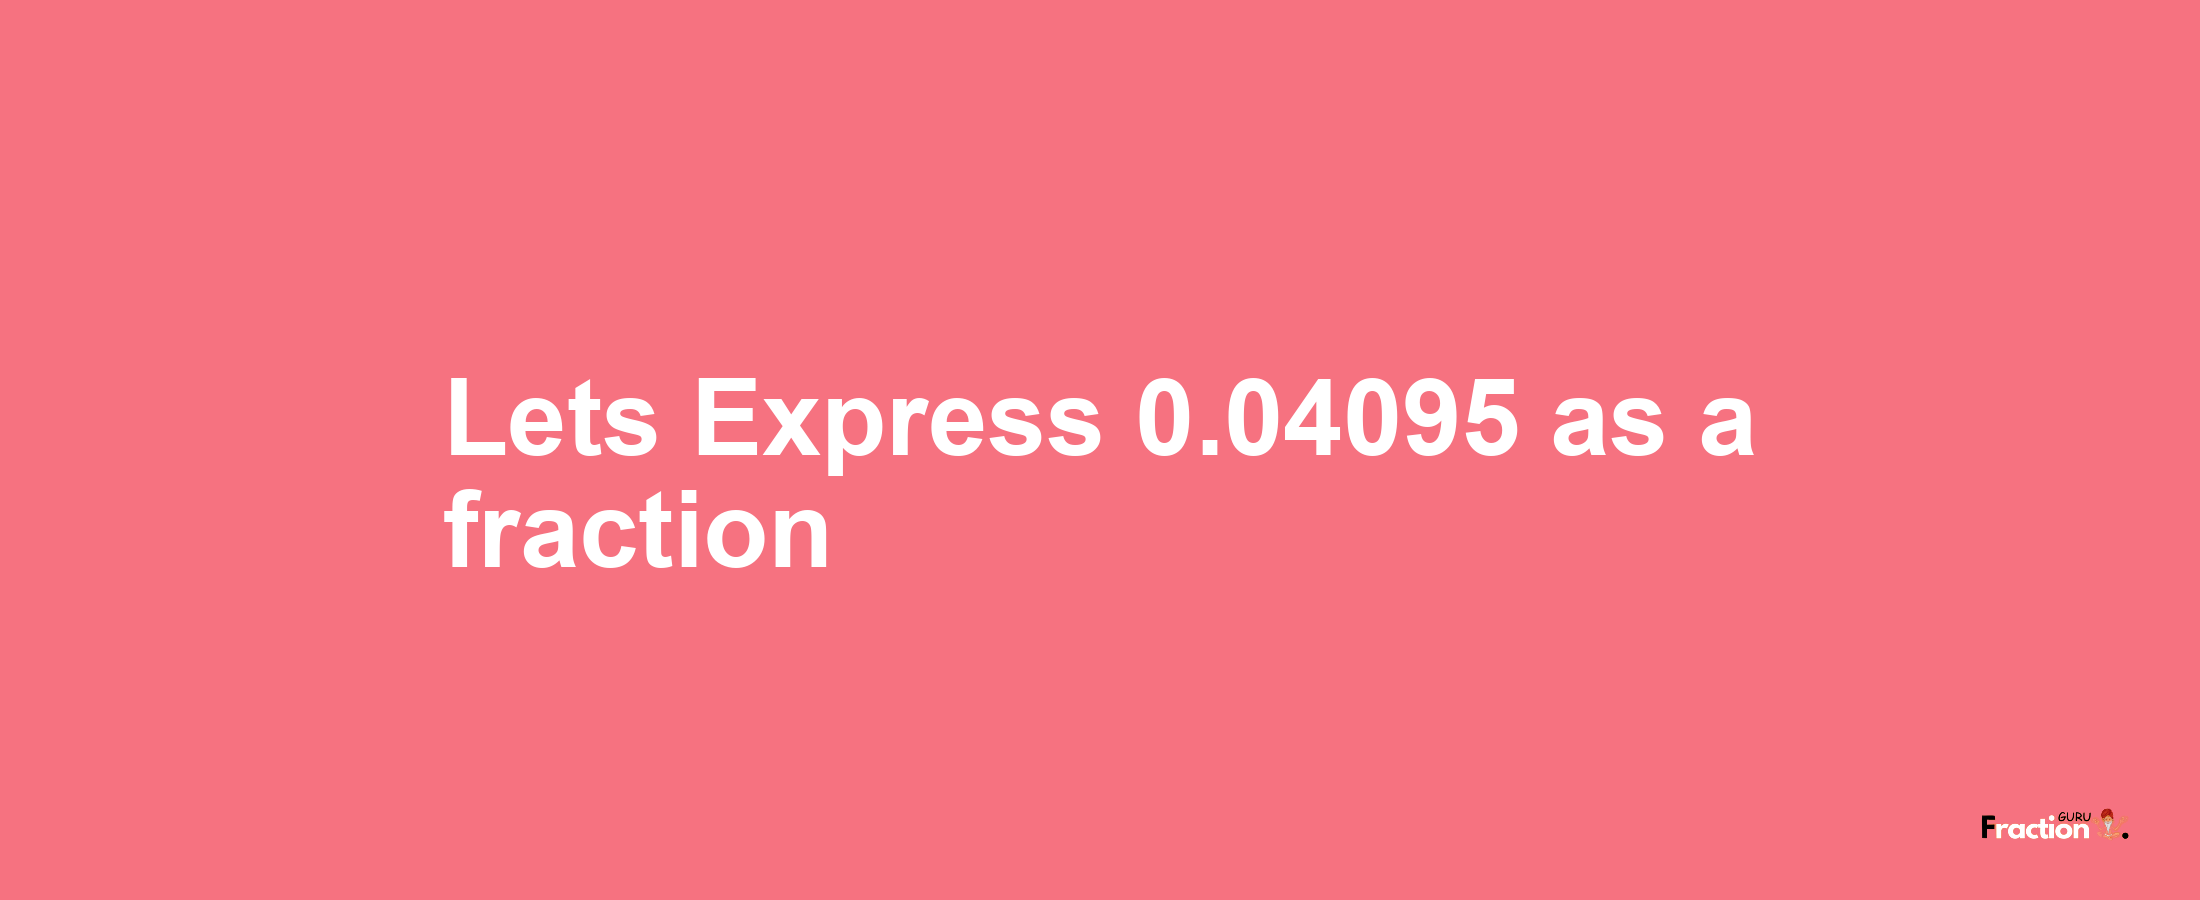 Lets Express 0.04095 as afraction